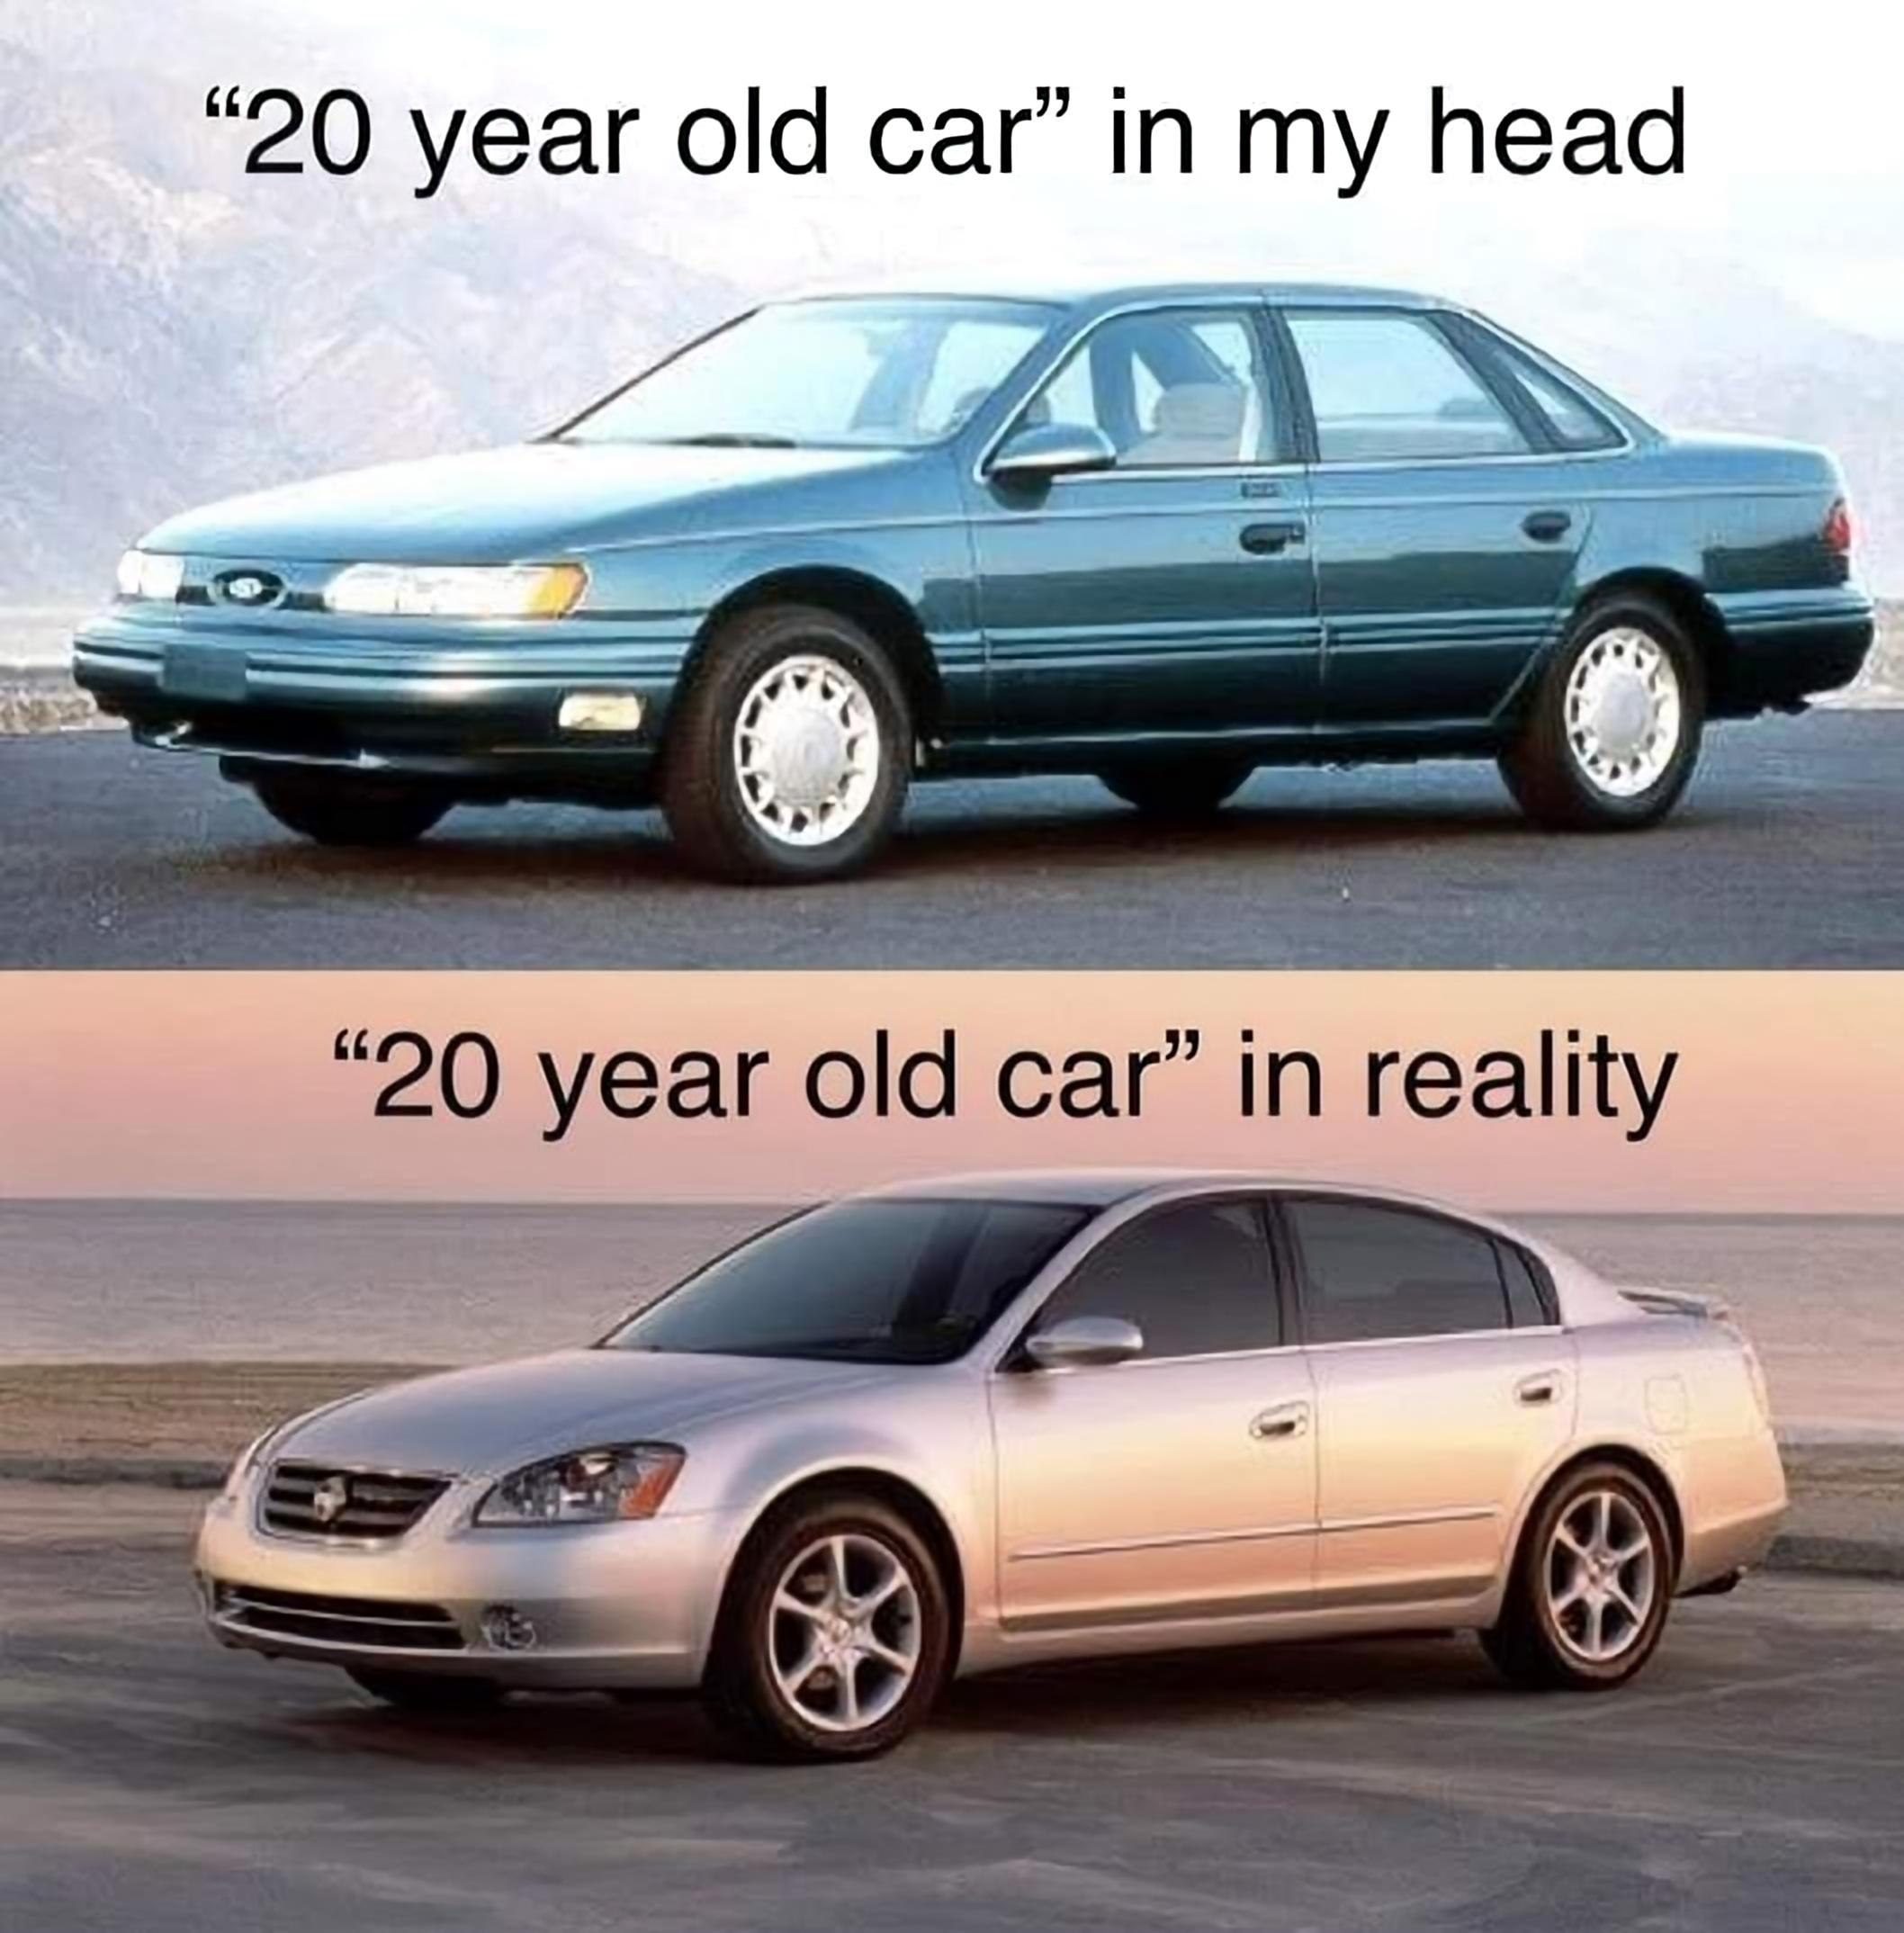 monday morning randomness - 2006 nissan altima - "20 year old car" in my head "20 year old car" in reality